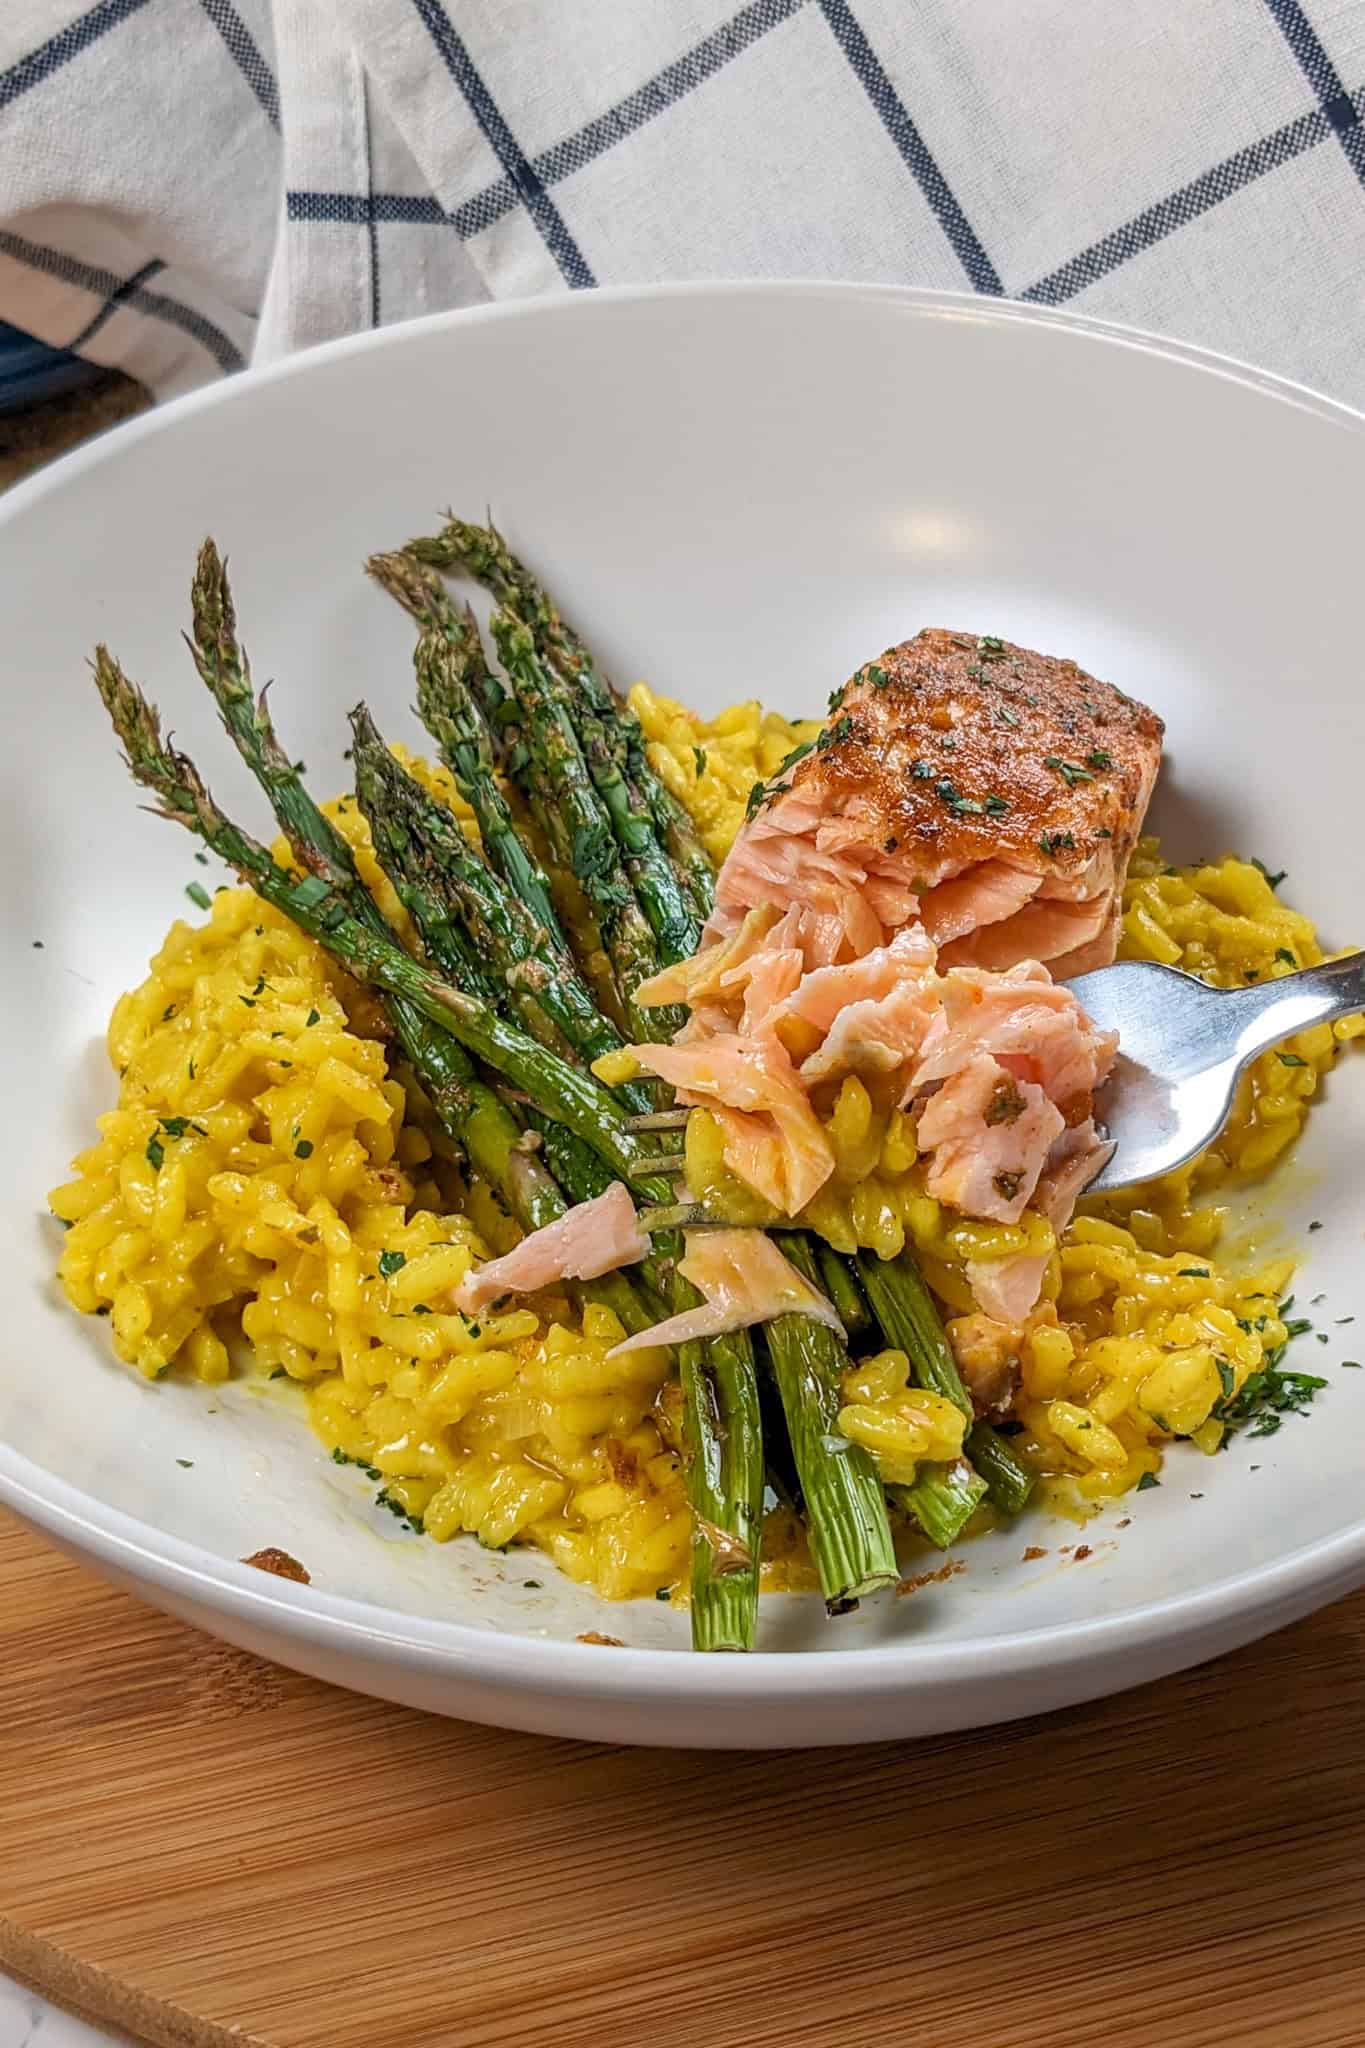 top view of the Best Air Fryer Habanero Adobo Salmon and Yellow Risotto with asparagus on a round wide rim bowl next to a kitchen towel with a fork with some of the risotto and salmon on it.